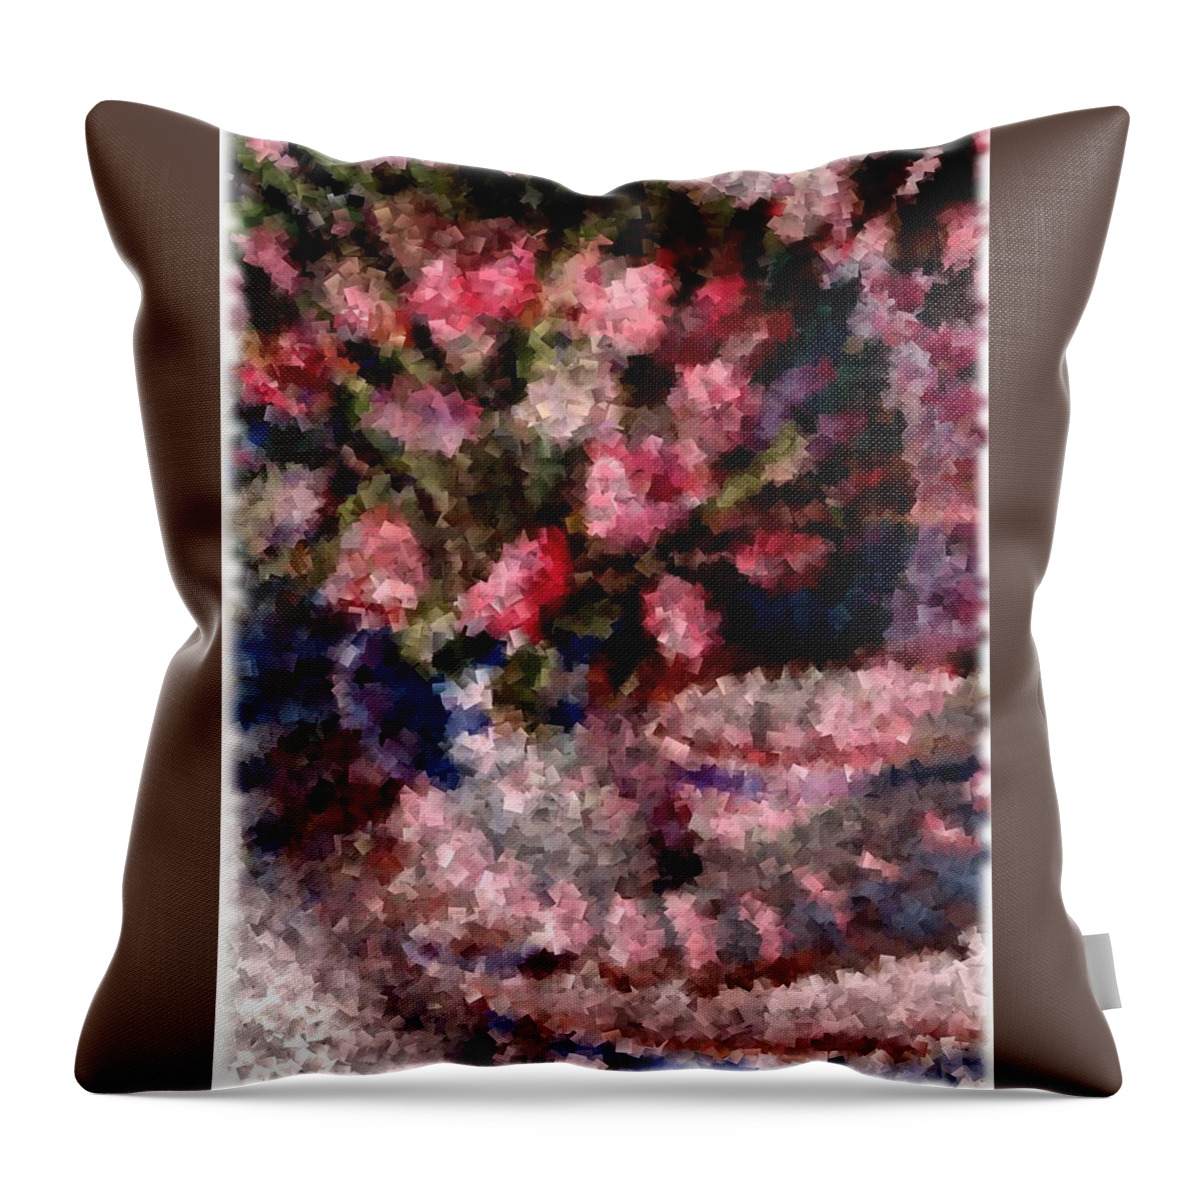 Digital Throw Pillow featuring the photograph For Antoinette by Renate Wesley